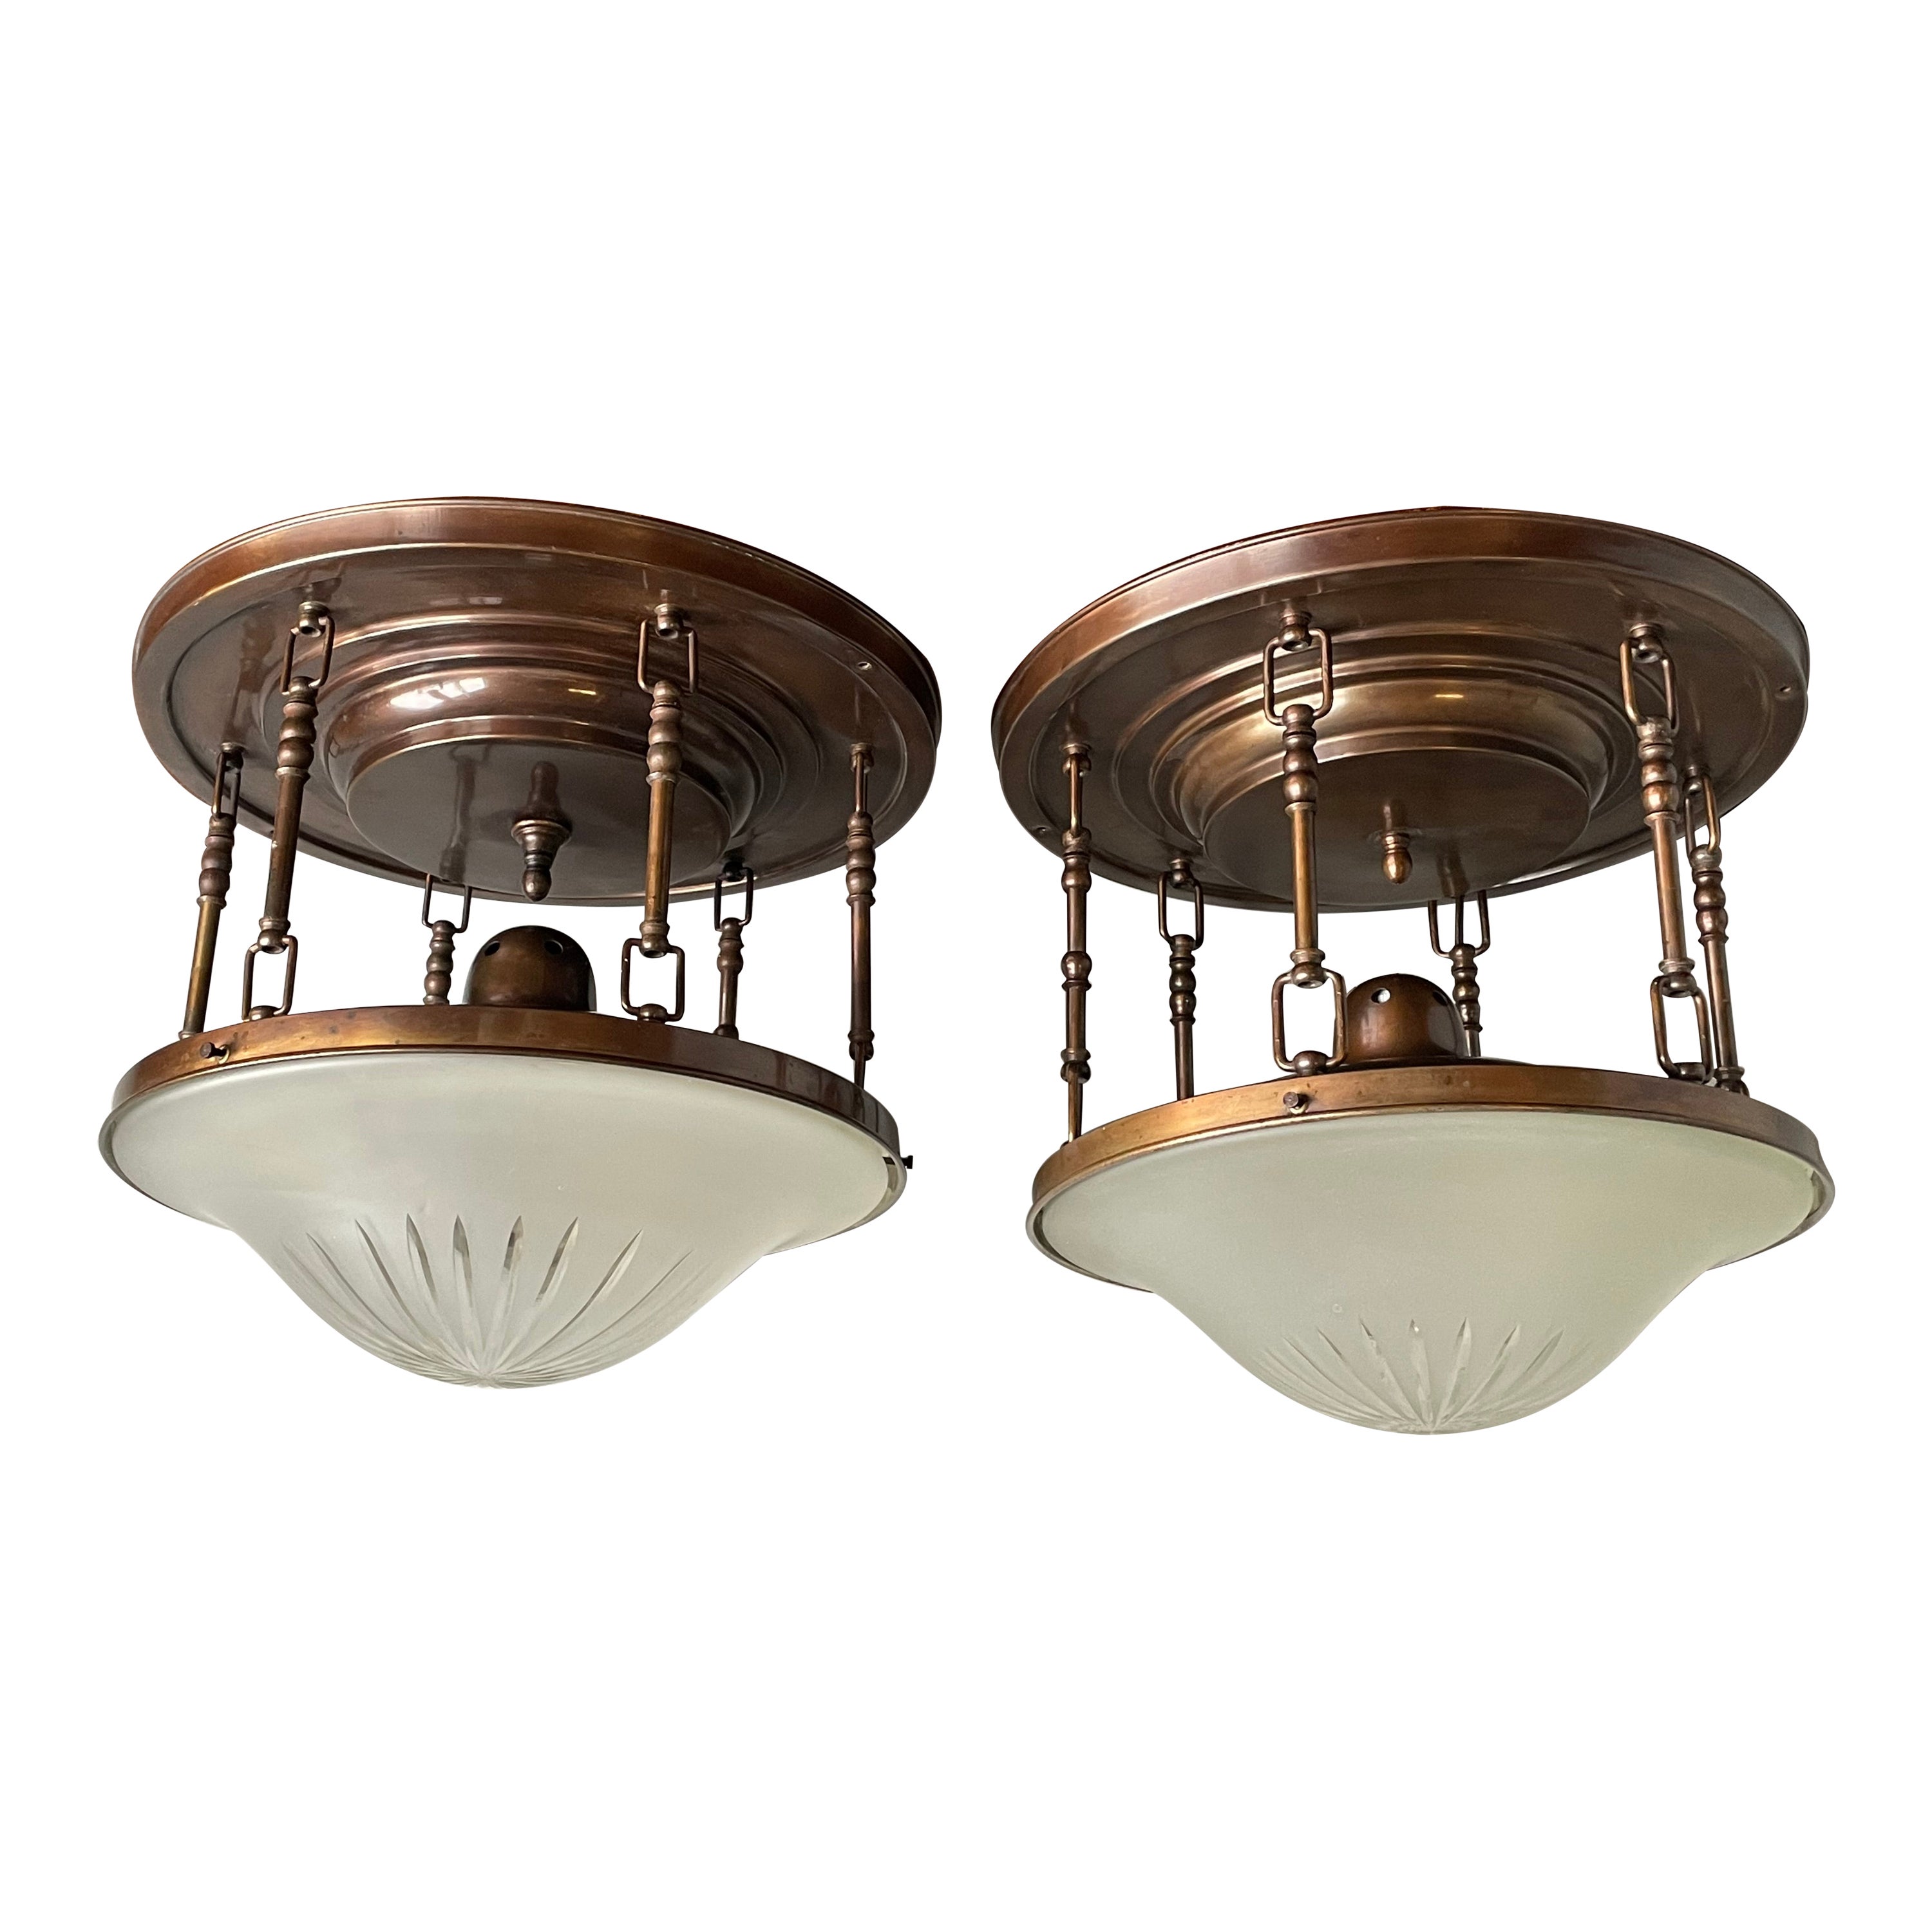 Near Pair of Arts & Crafts, Brass and Glass Shades Flush Mounts / Ceiling Lights For Sale